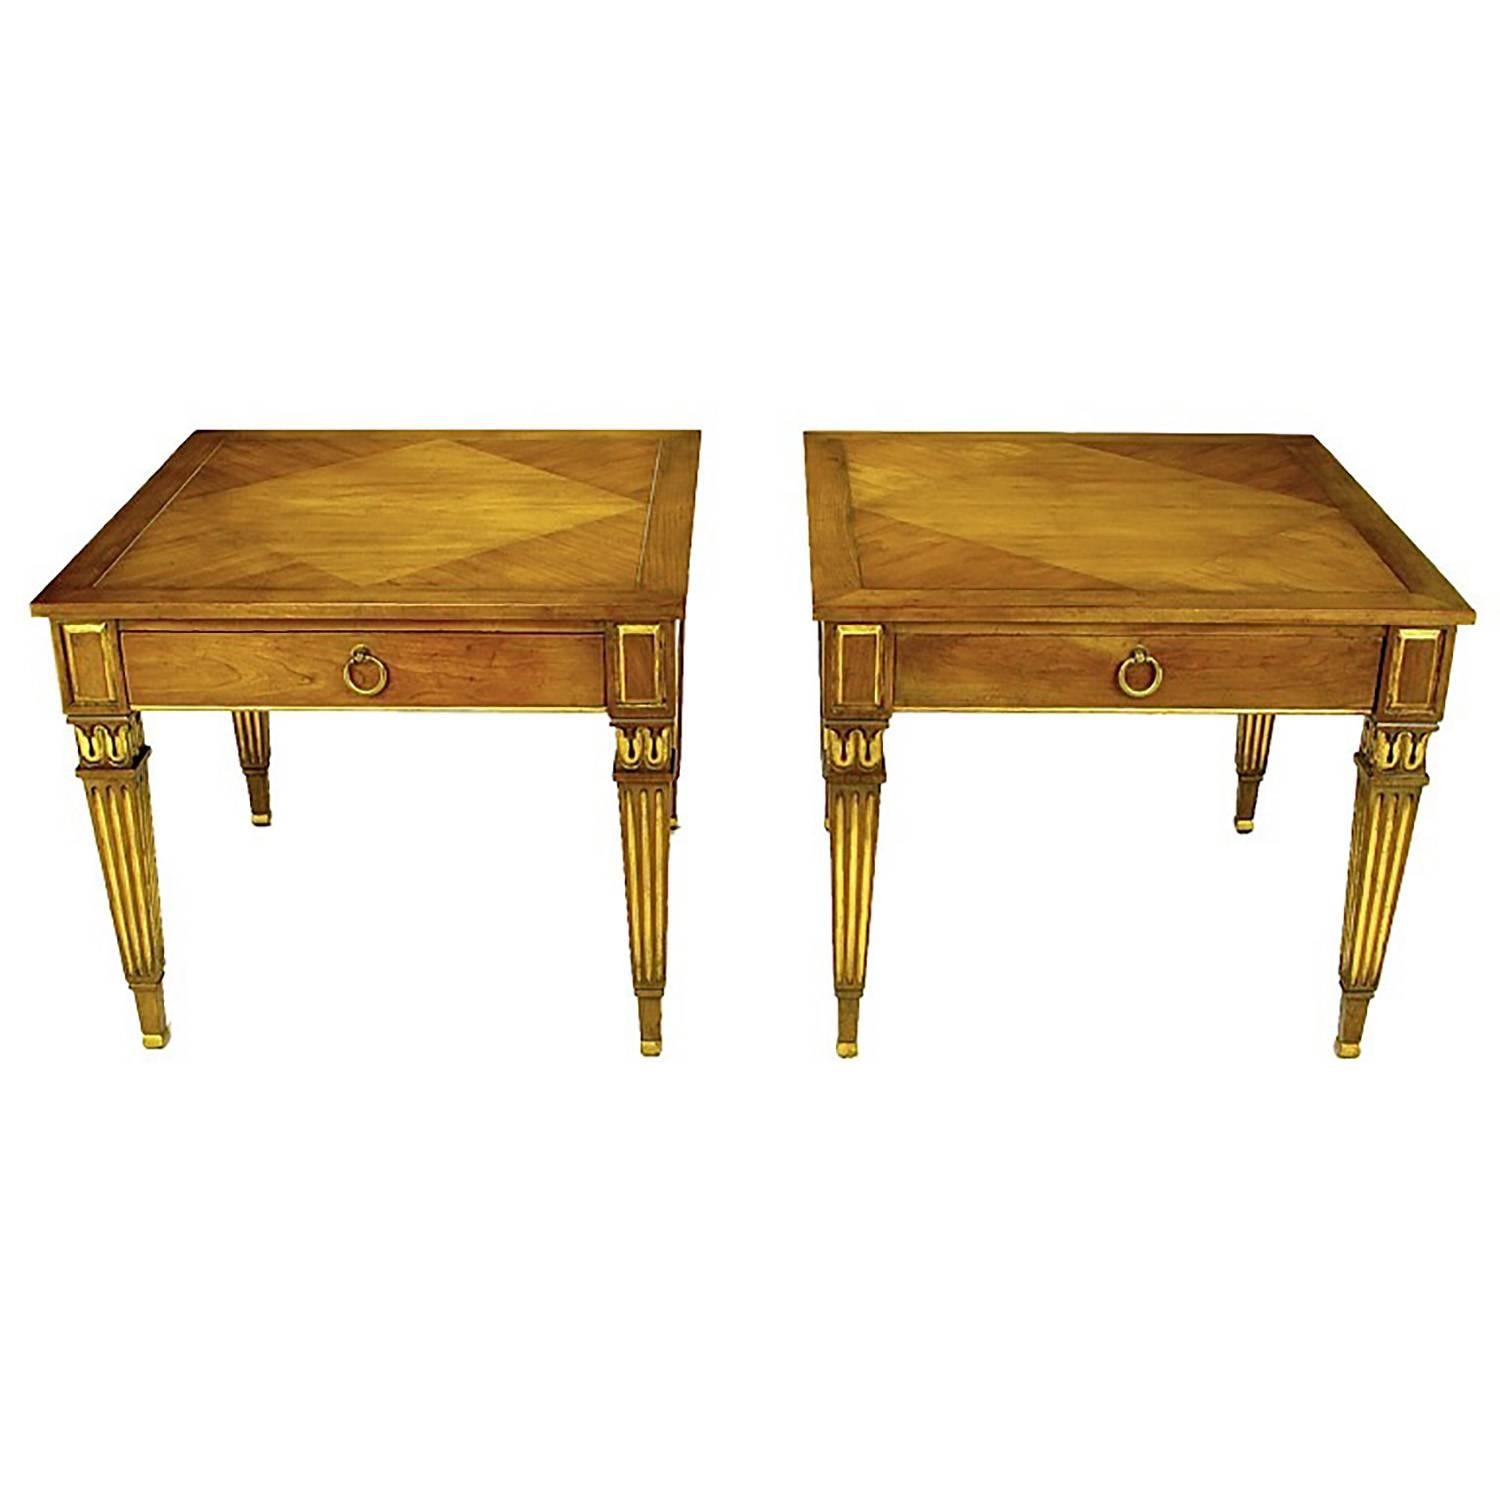 Pair of Louis XVI Style Parcel-Gilt End Tables by Baker